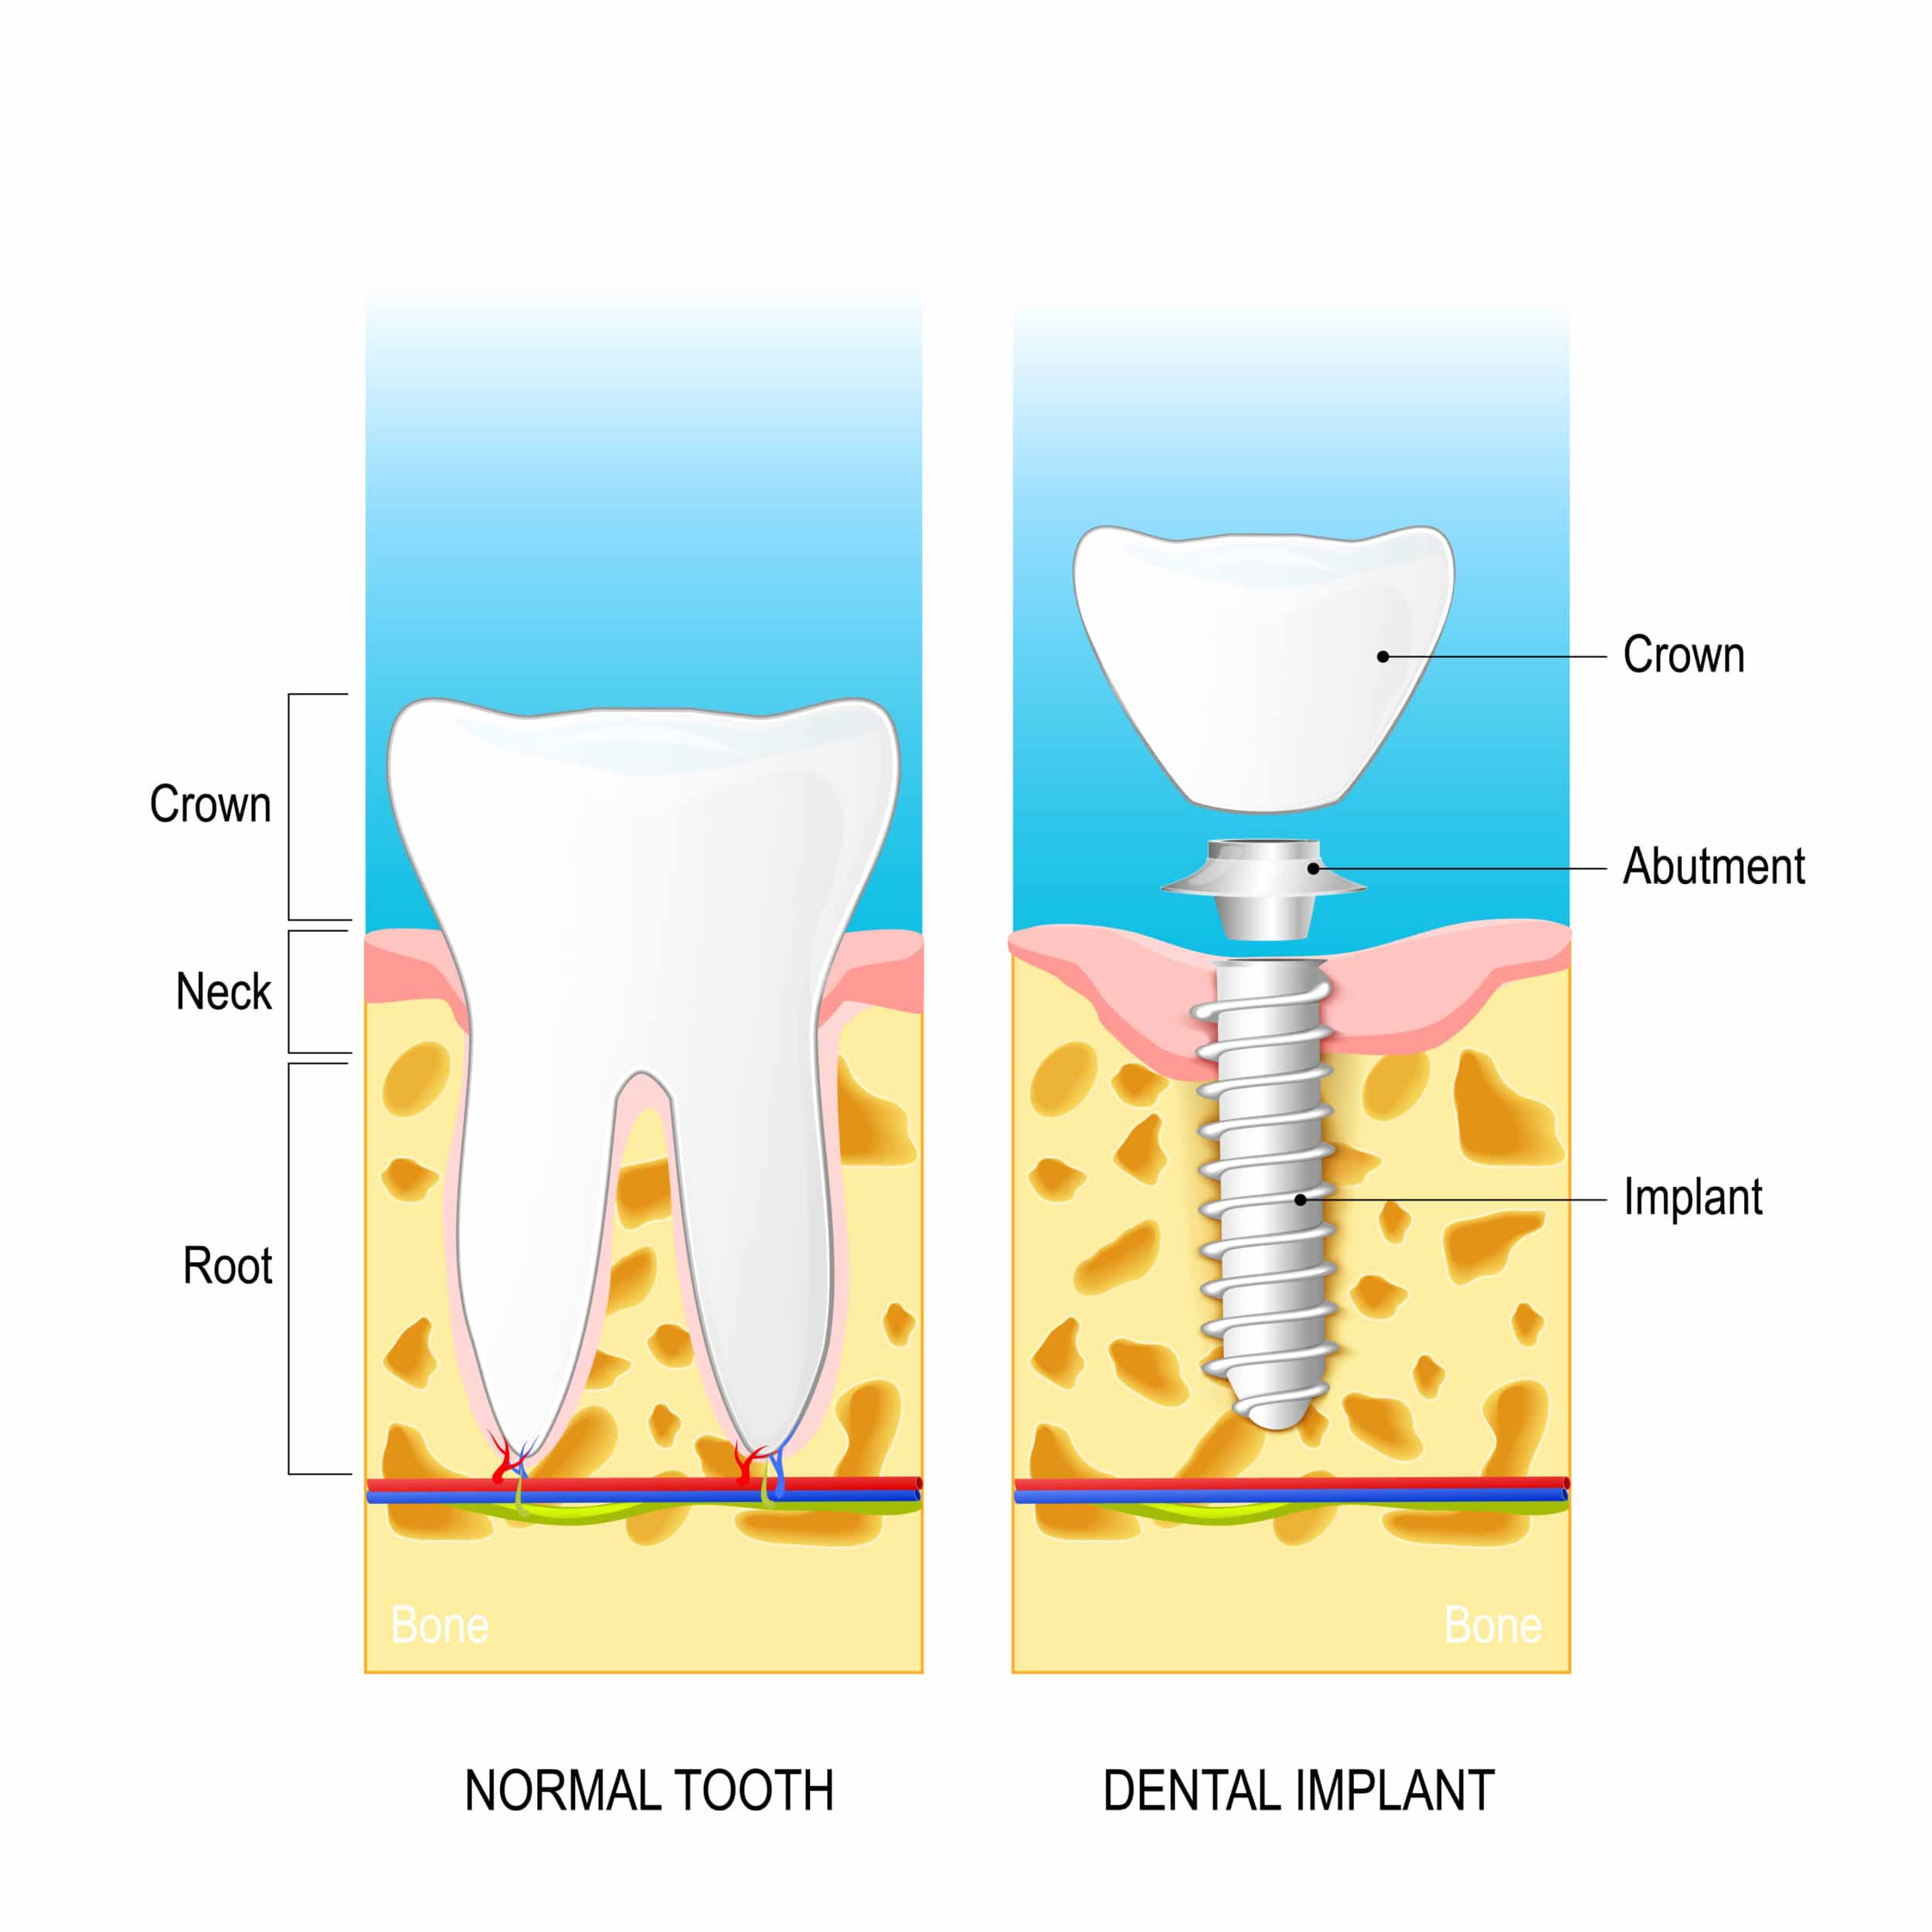 Normal Human tooth and Structure of Dental Implant